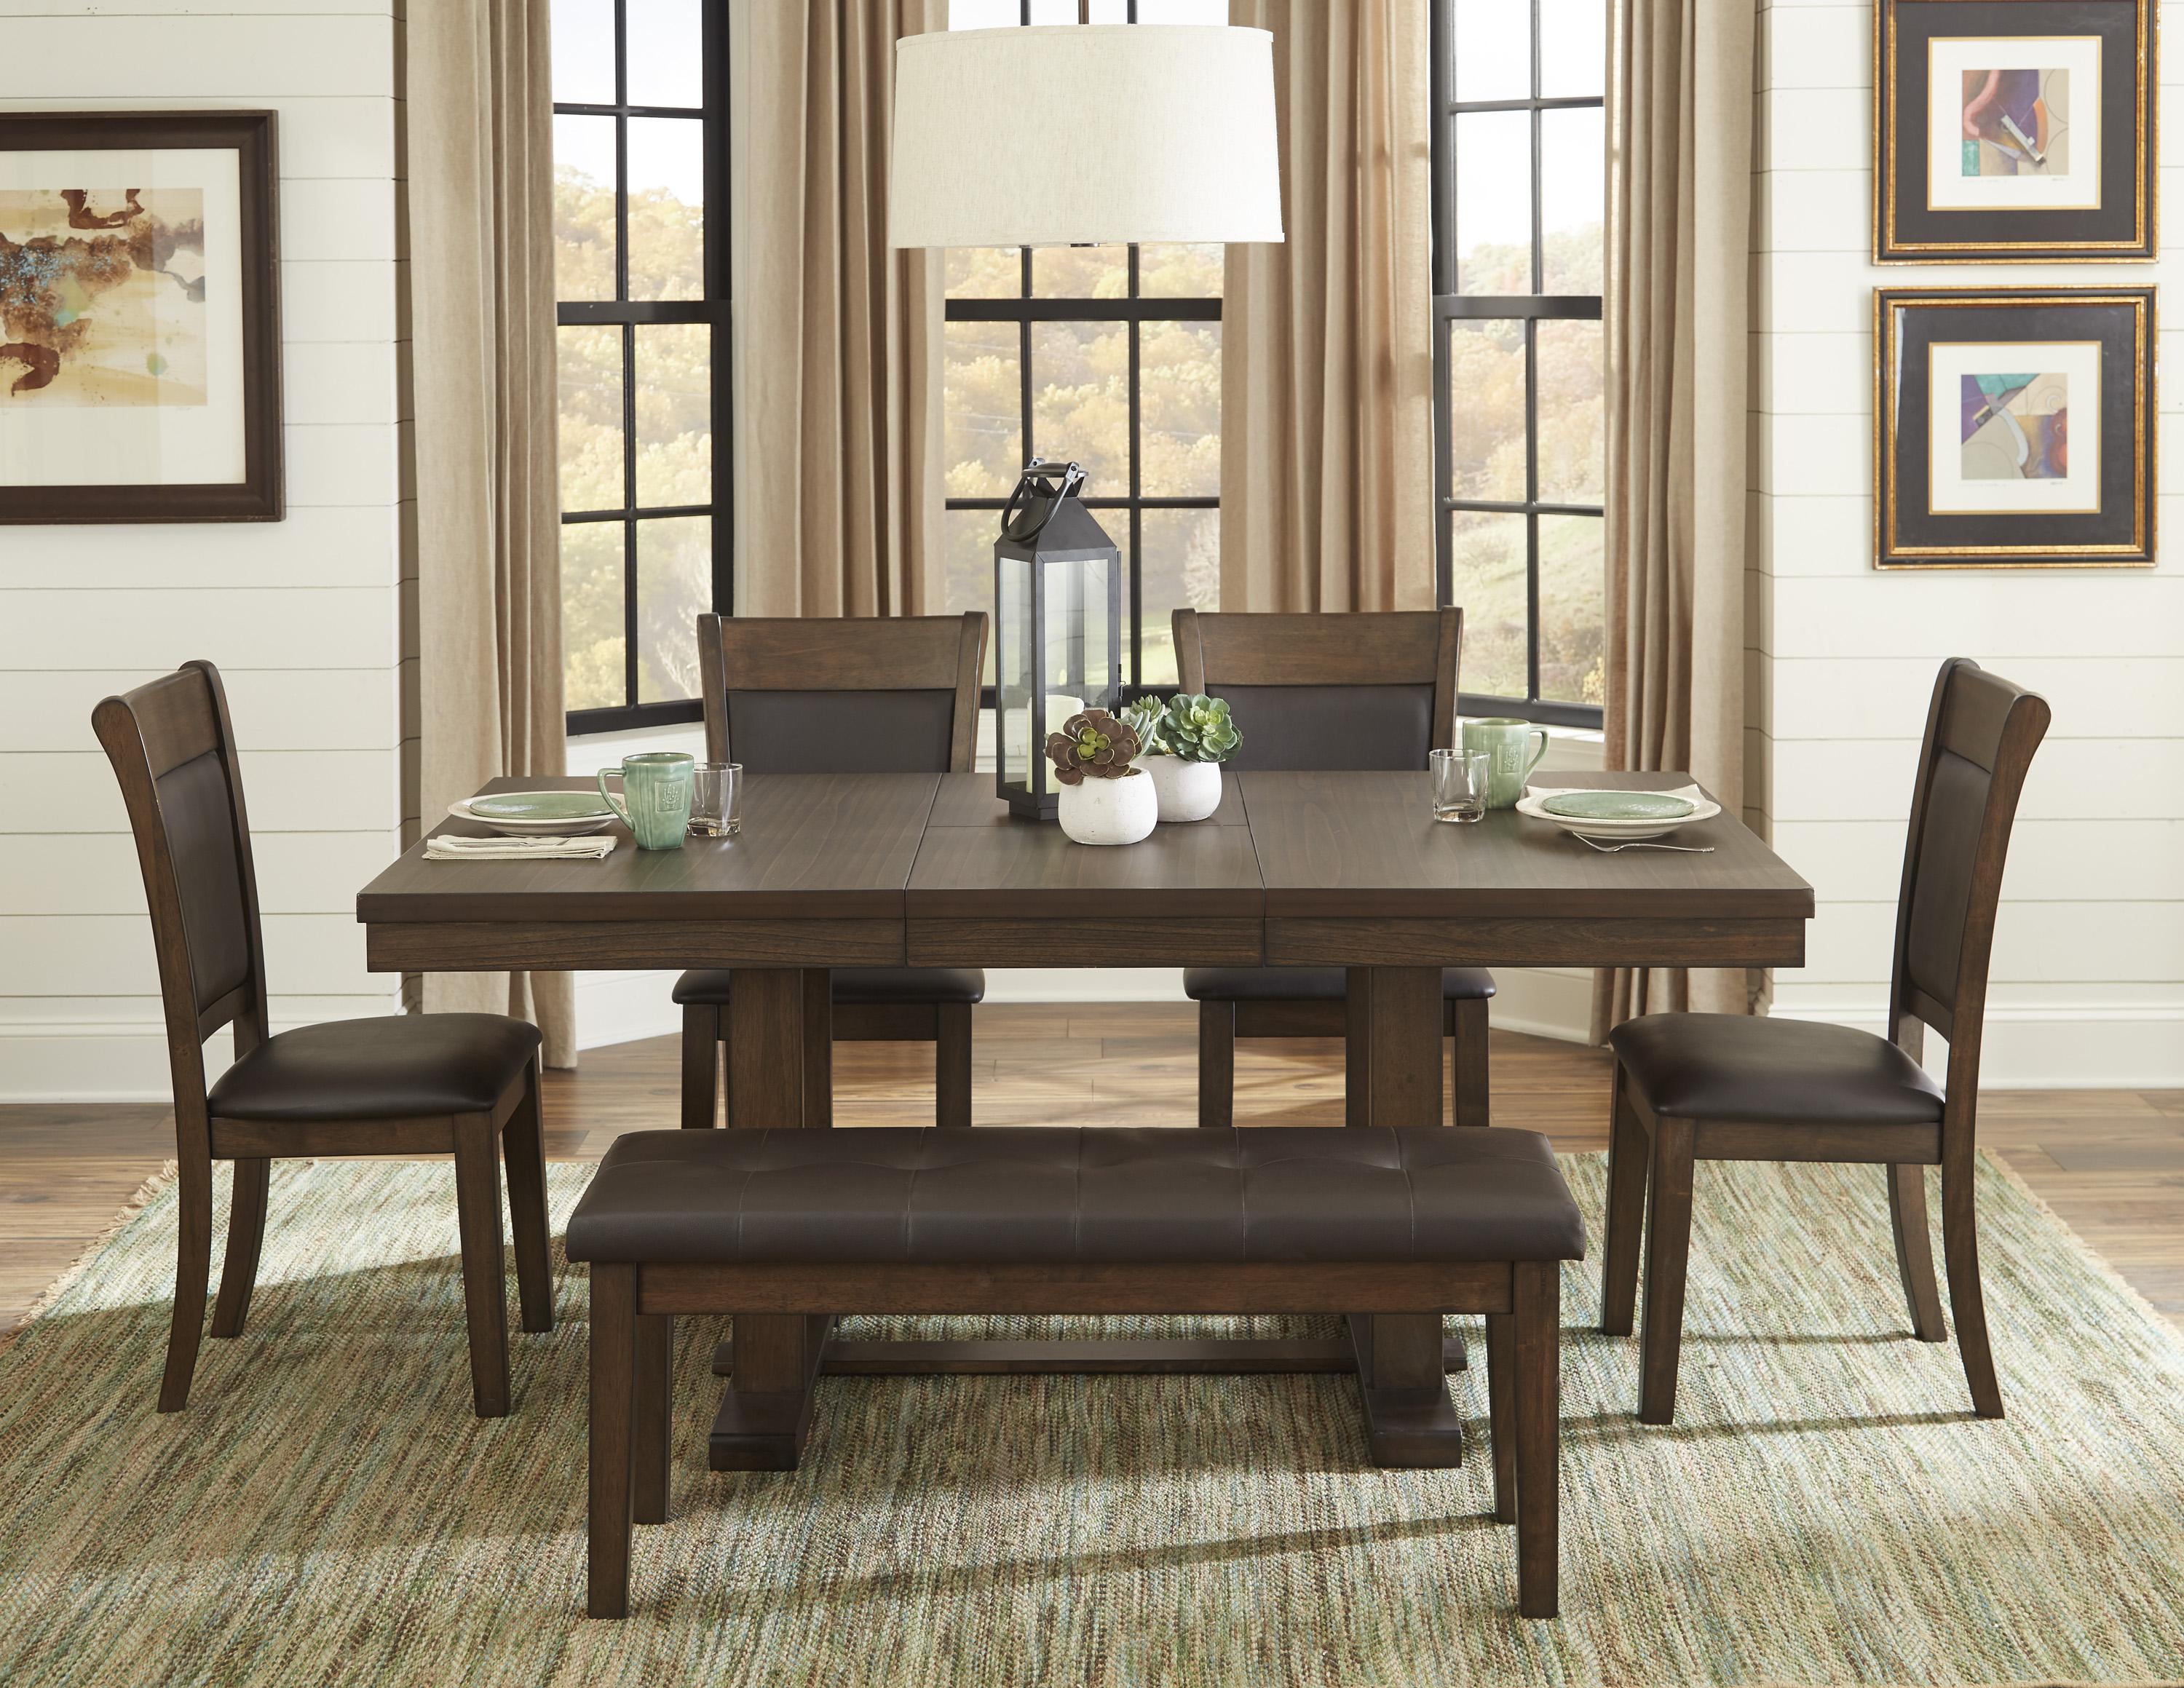 Transitional Dining Room Set 5614-72*6PC Wieland 5614-72*6PC in Rustic Brown Faux Leather